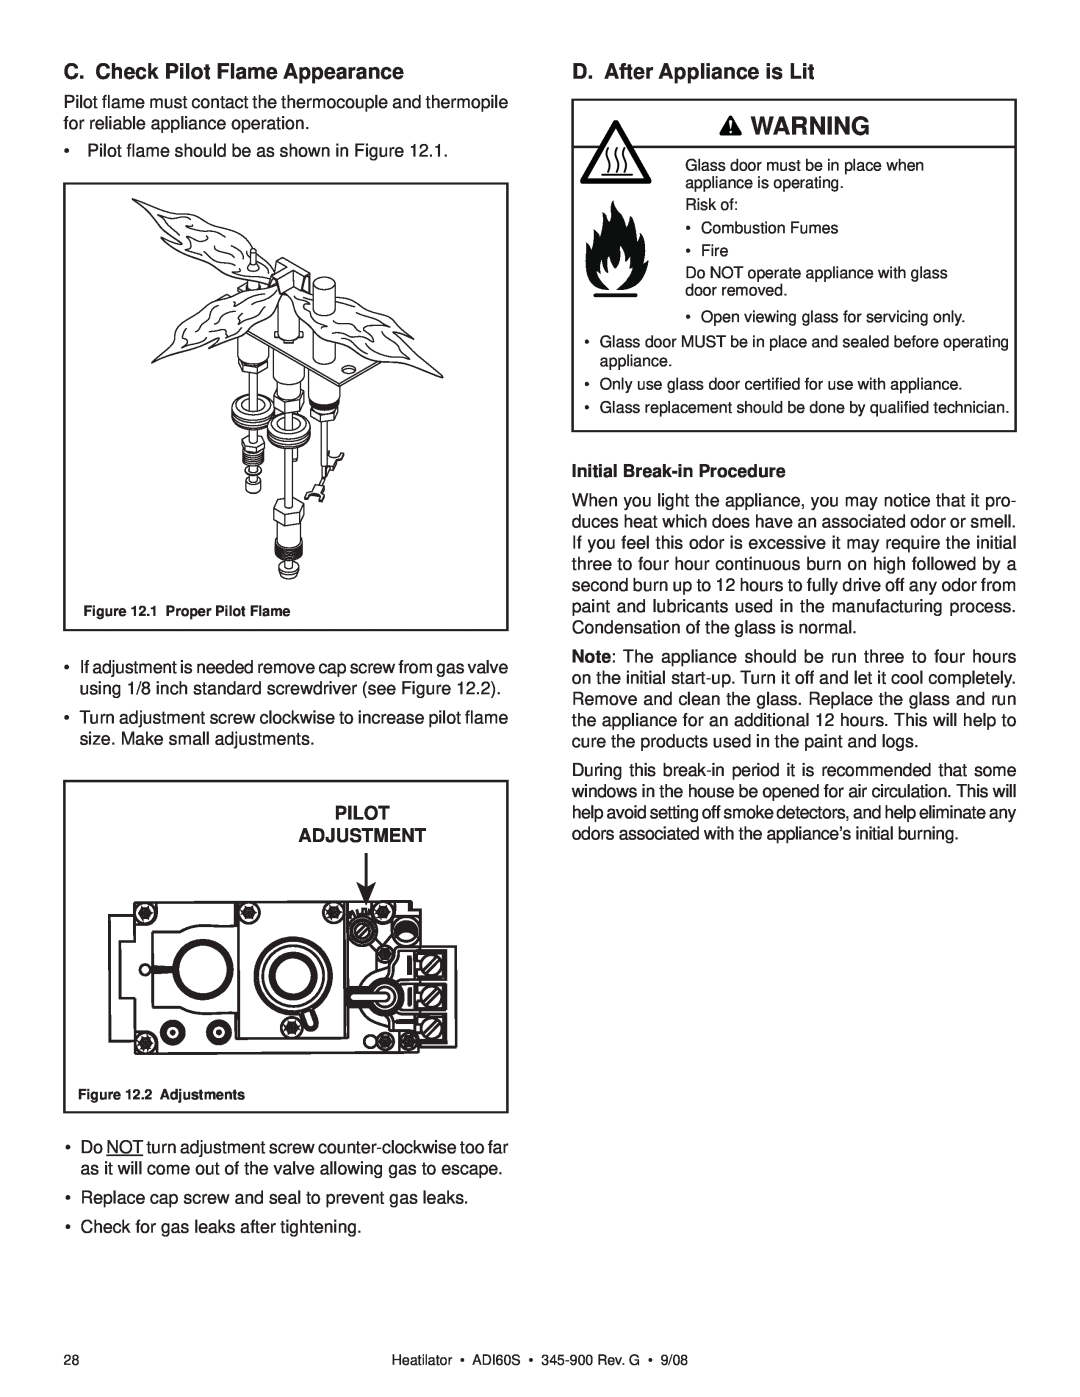 Heatiator ADI60S owner manual C. Check Pilot Flame Appearance, D. After Appliance is Lit, Adjustment 